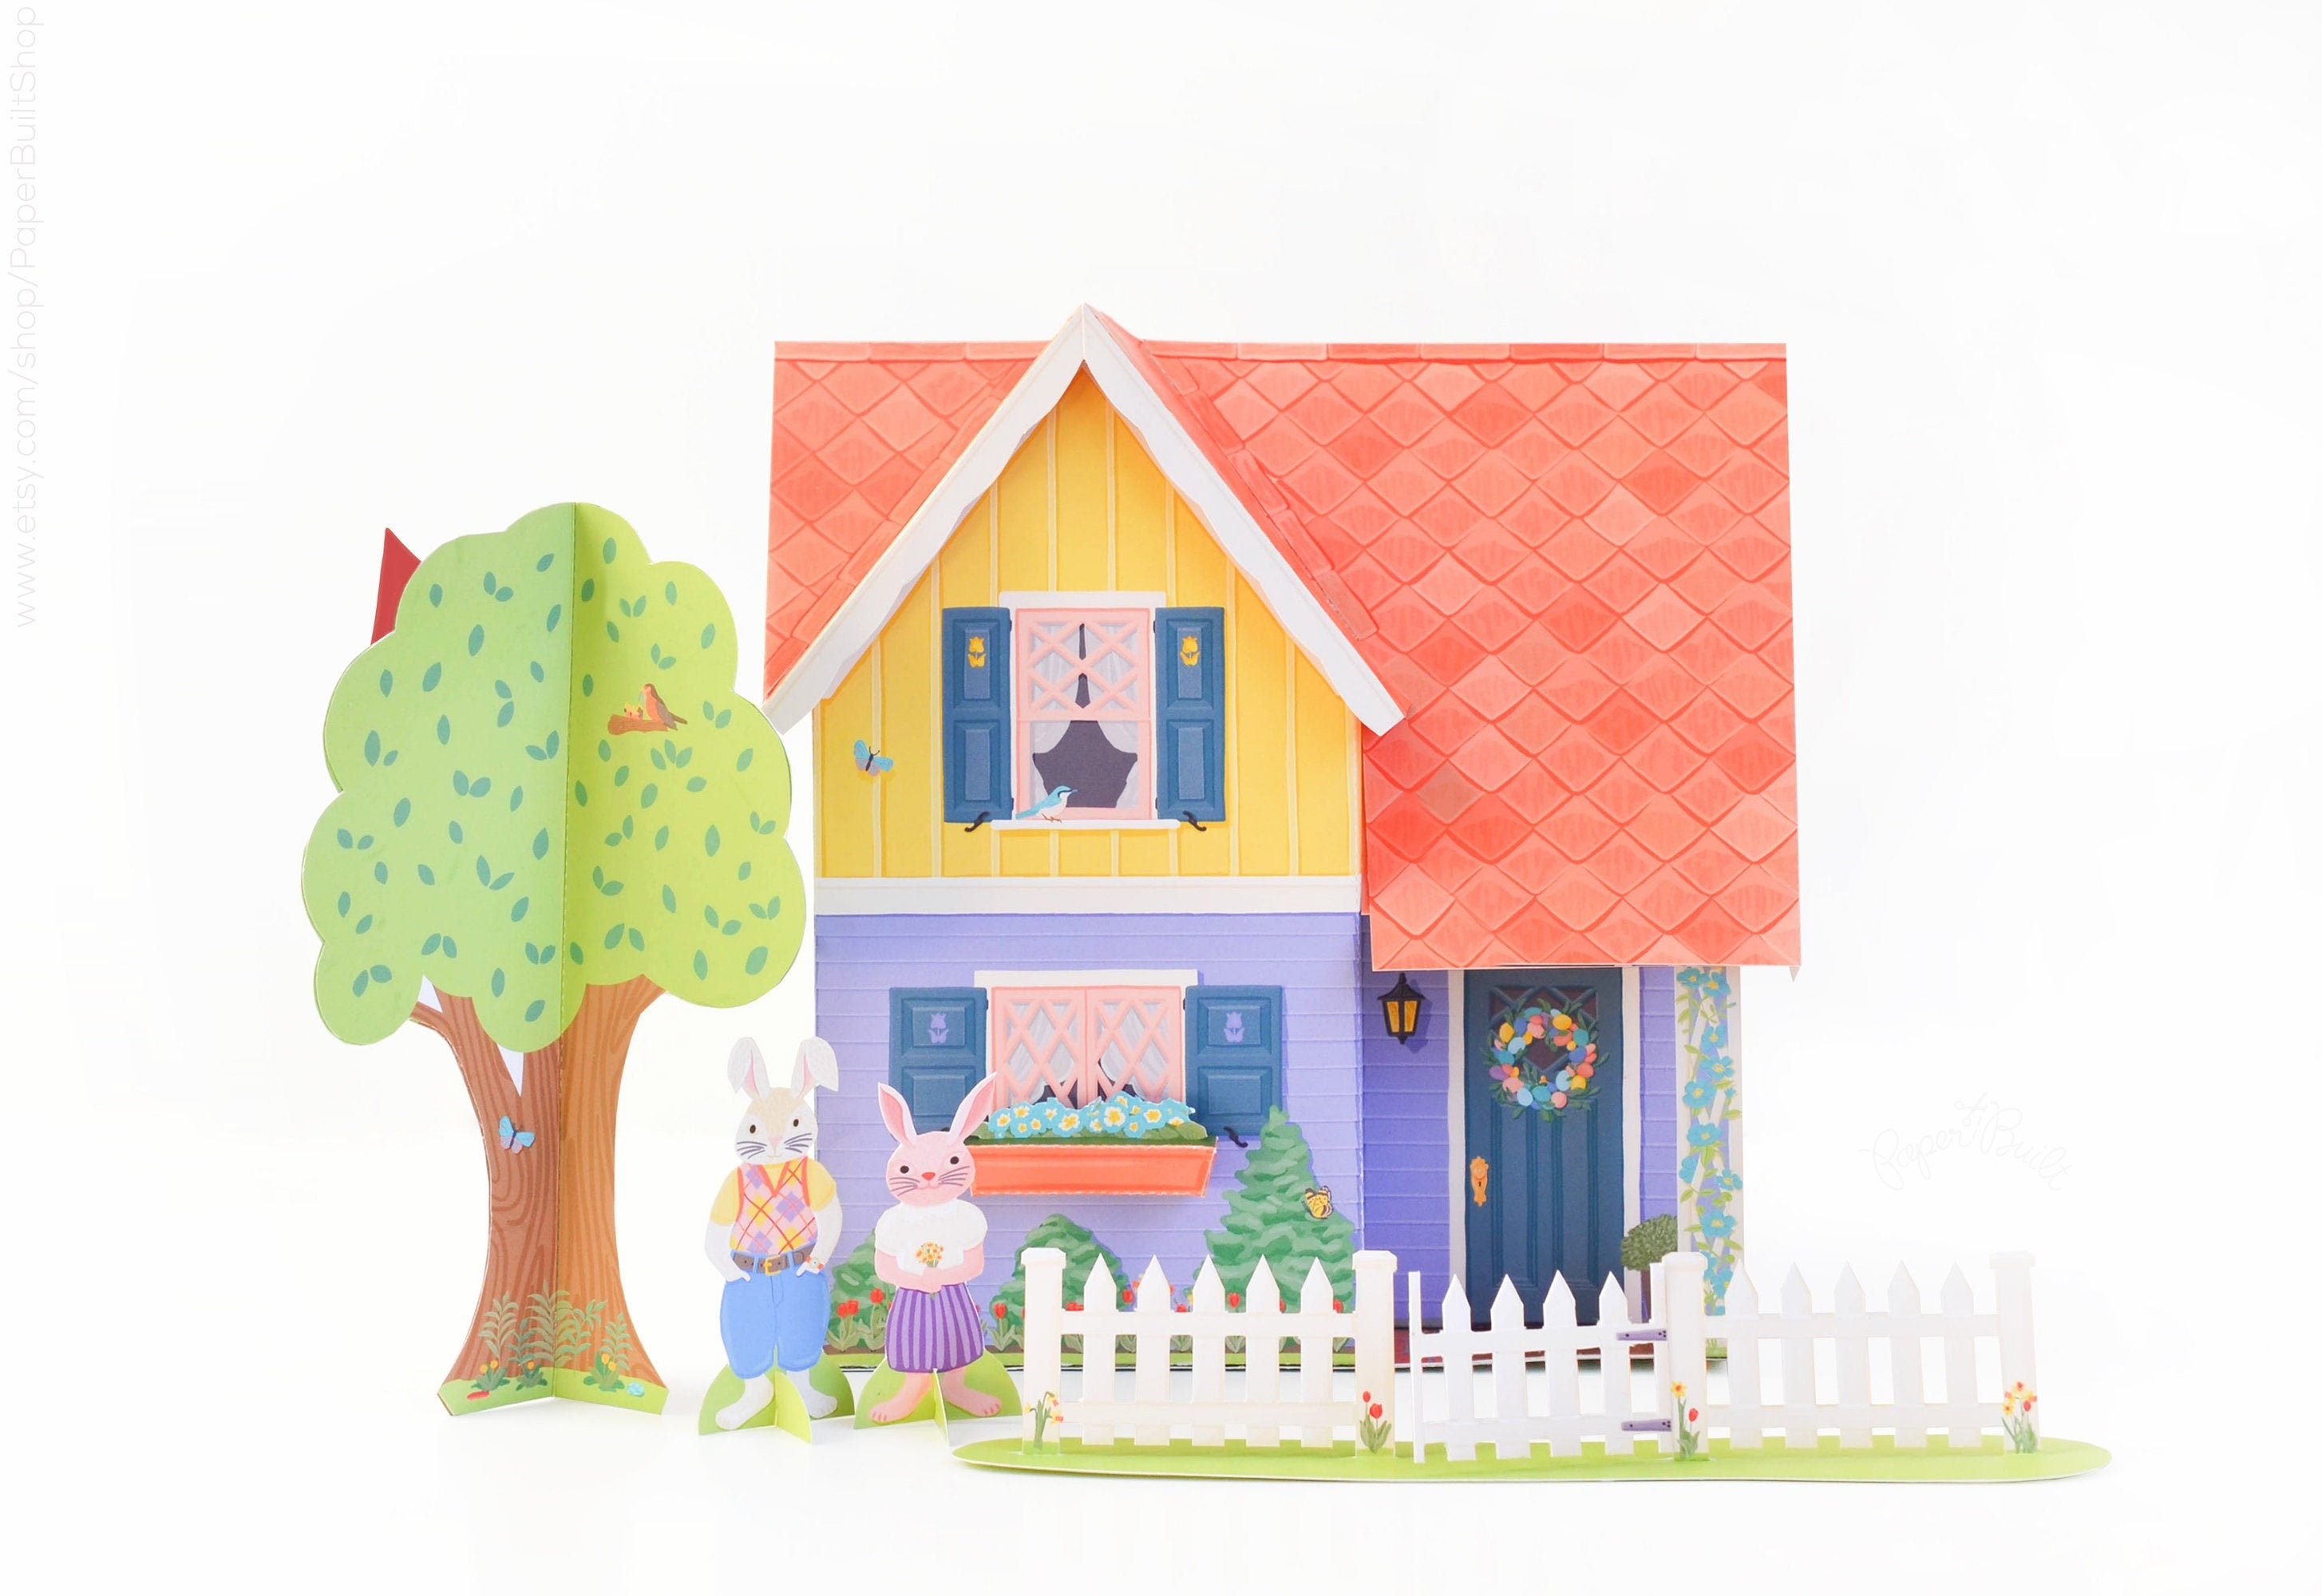 🏠🚗👩👨👶SIMPLE DOLLHOUSE OF PAPER FOR KIDS HANDMADE FOR PAPER DOLLS 